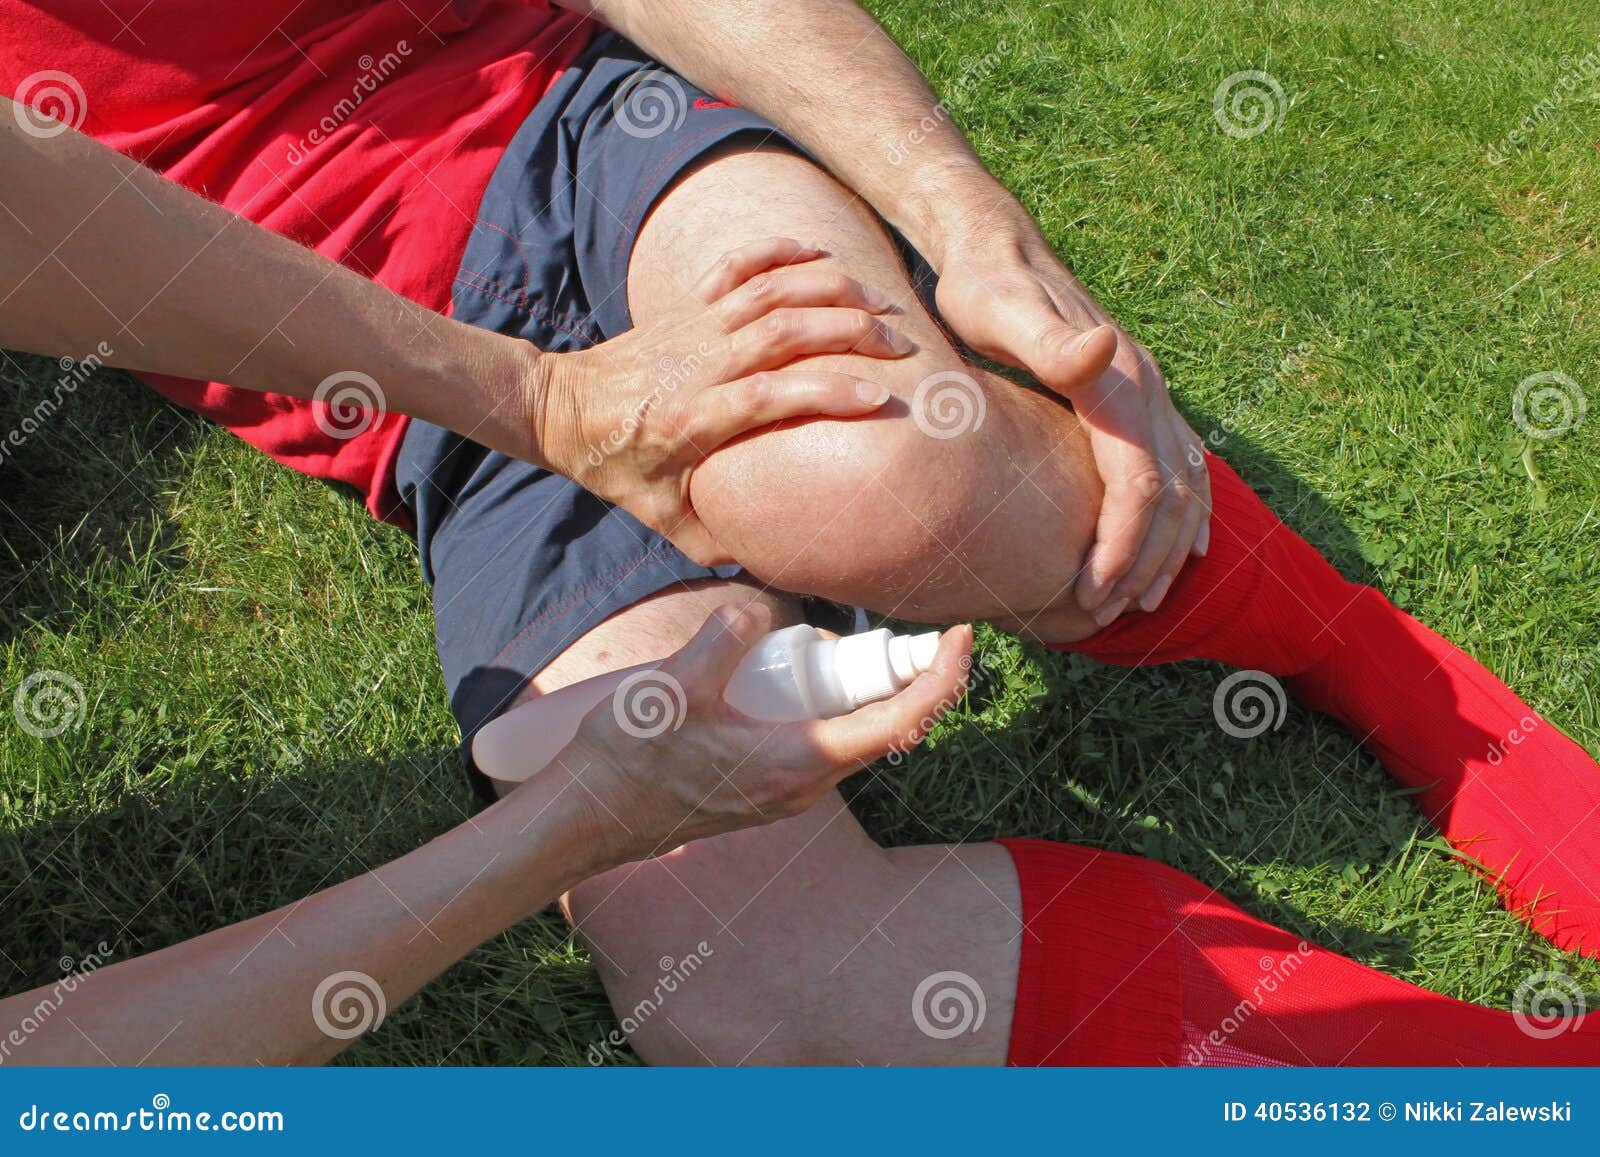 injured sportsman being helped by therapist